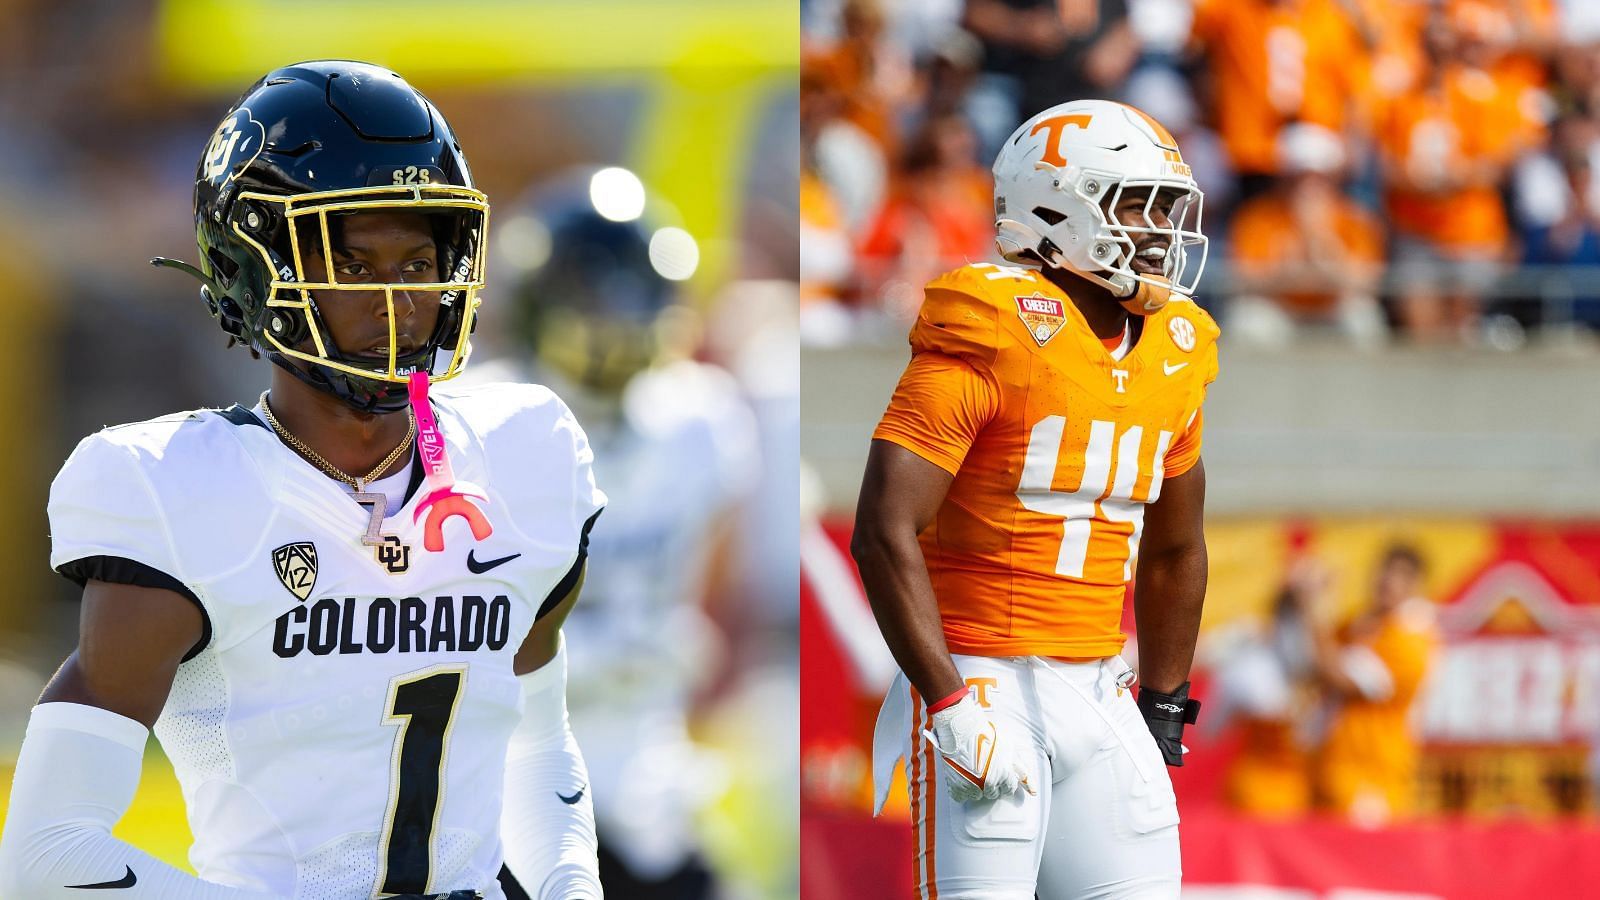 Colorado transfer Cormani McClain and Tennessee transfer Elijah Herring are two of the top prospects still in the transfer portal.